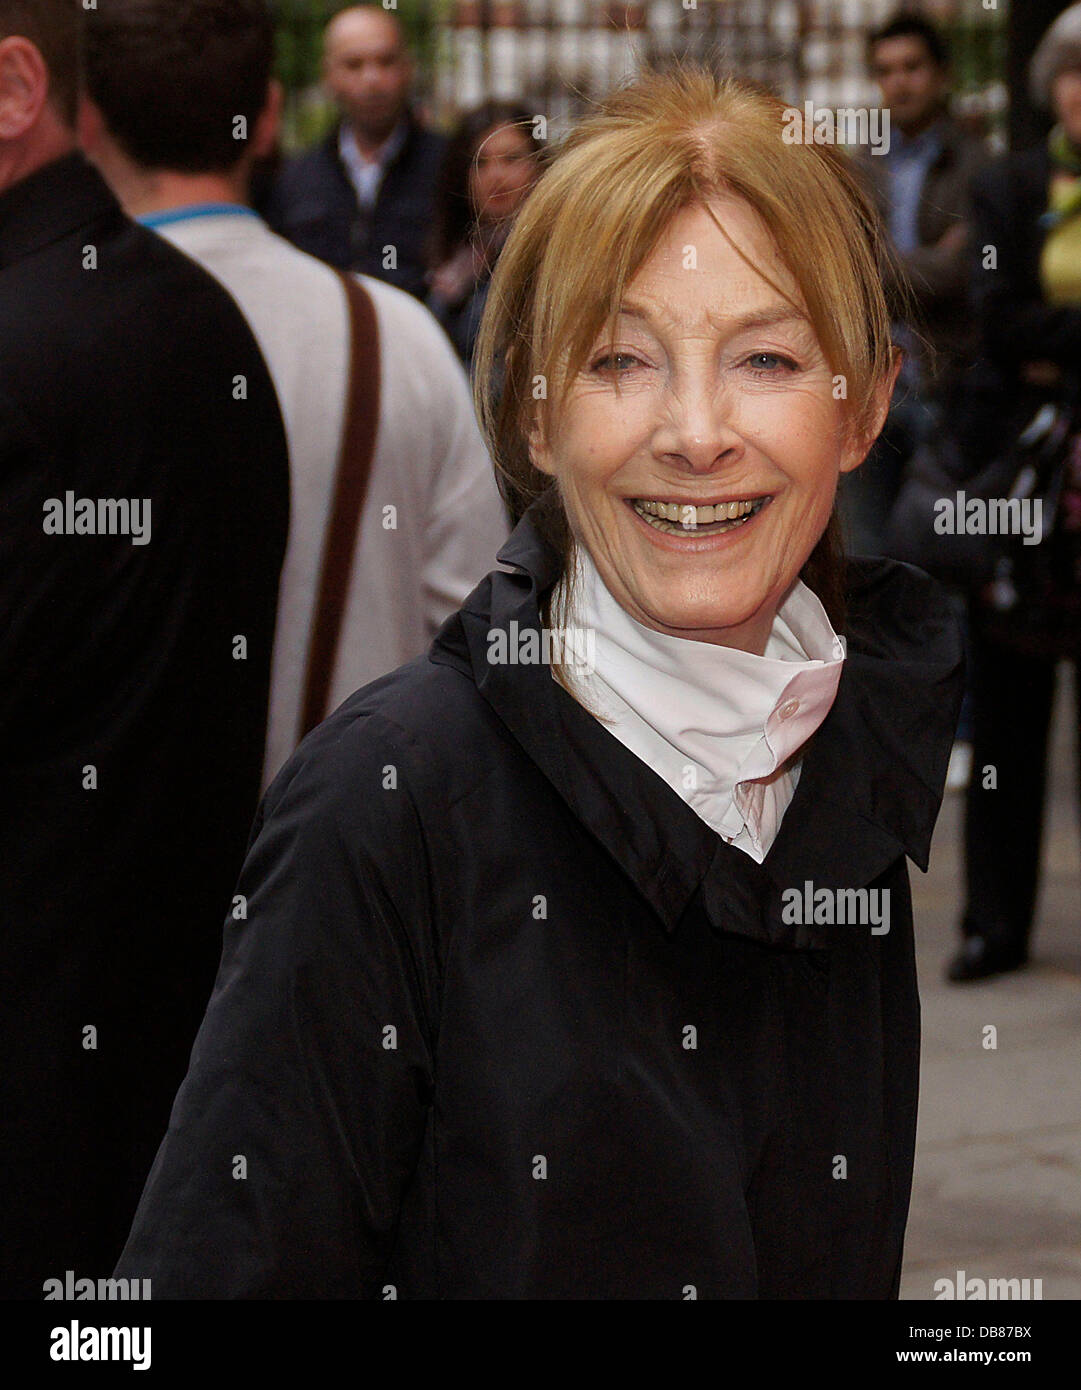 Jean Marsh at the Northern Ballet's press night of 'Cleopatra' at Saddlers Wells Theatre - Arrivals London, England - 17.05.11 Stock Photo